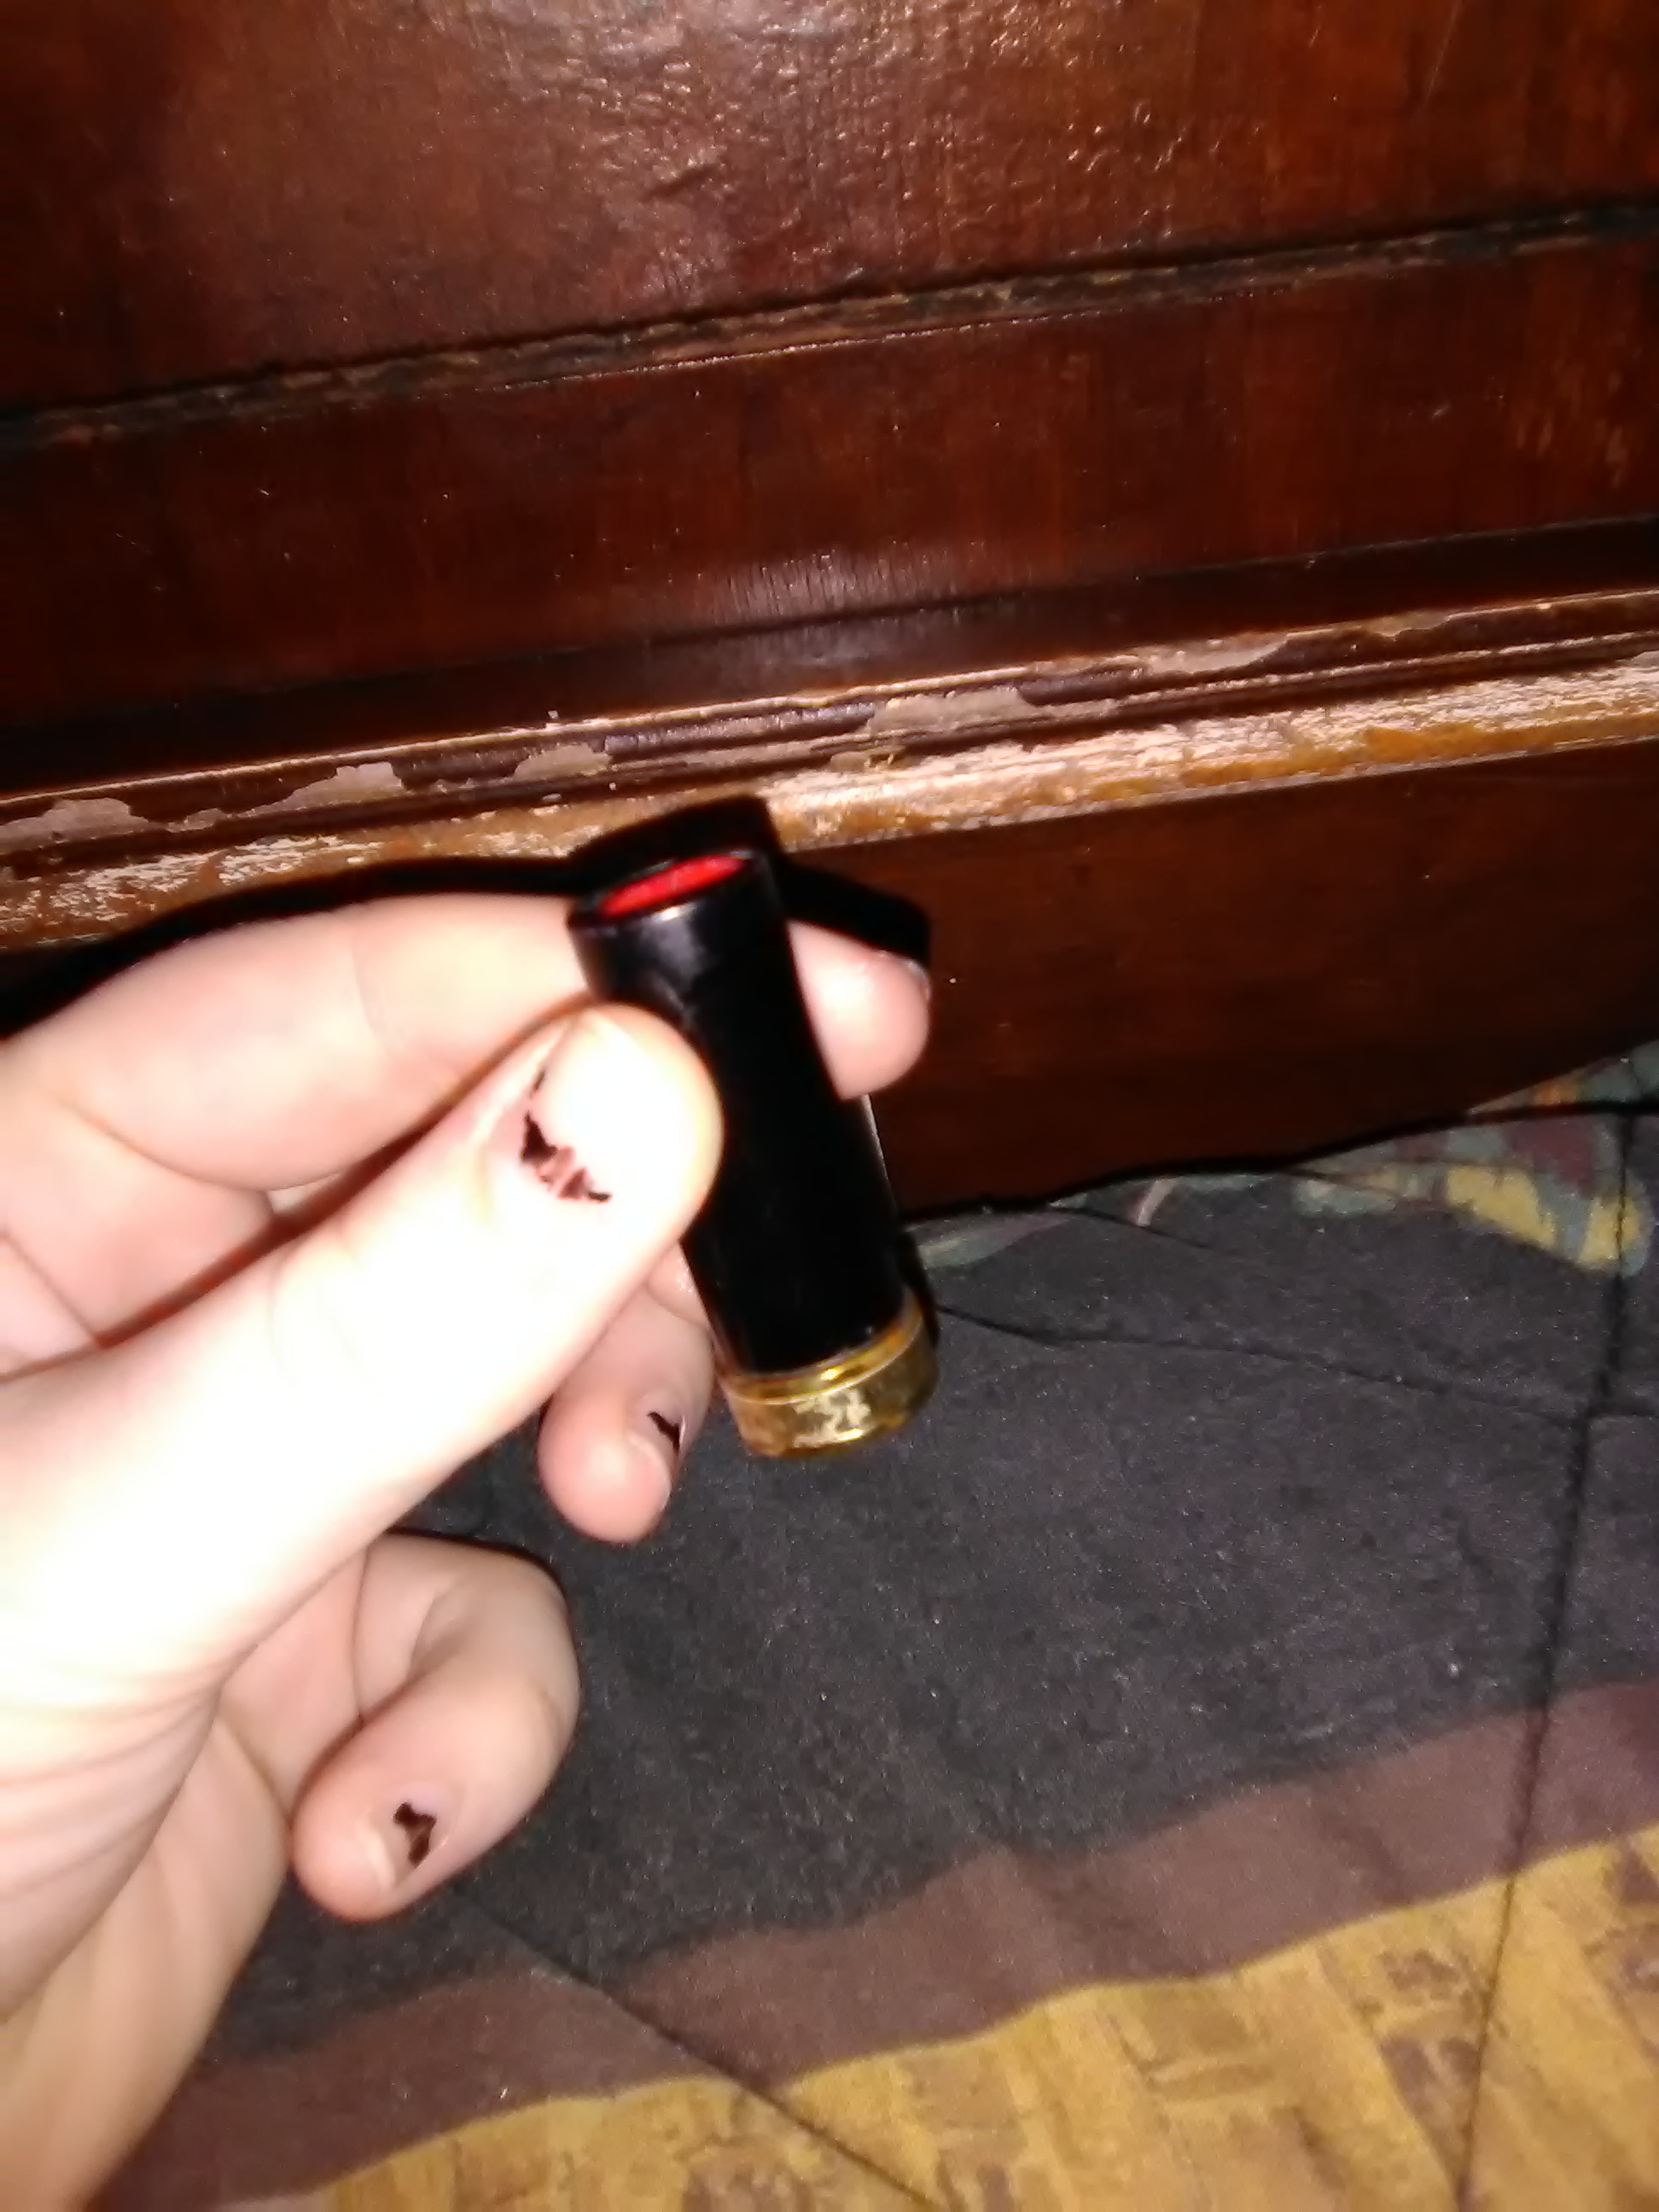 Vintage lipstick looking tube but with a wire brush inside? :  r/whatisthisthing